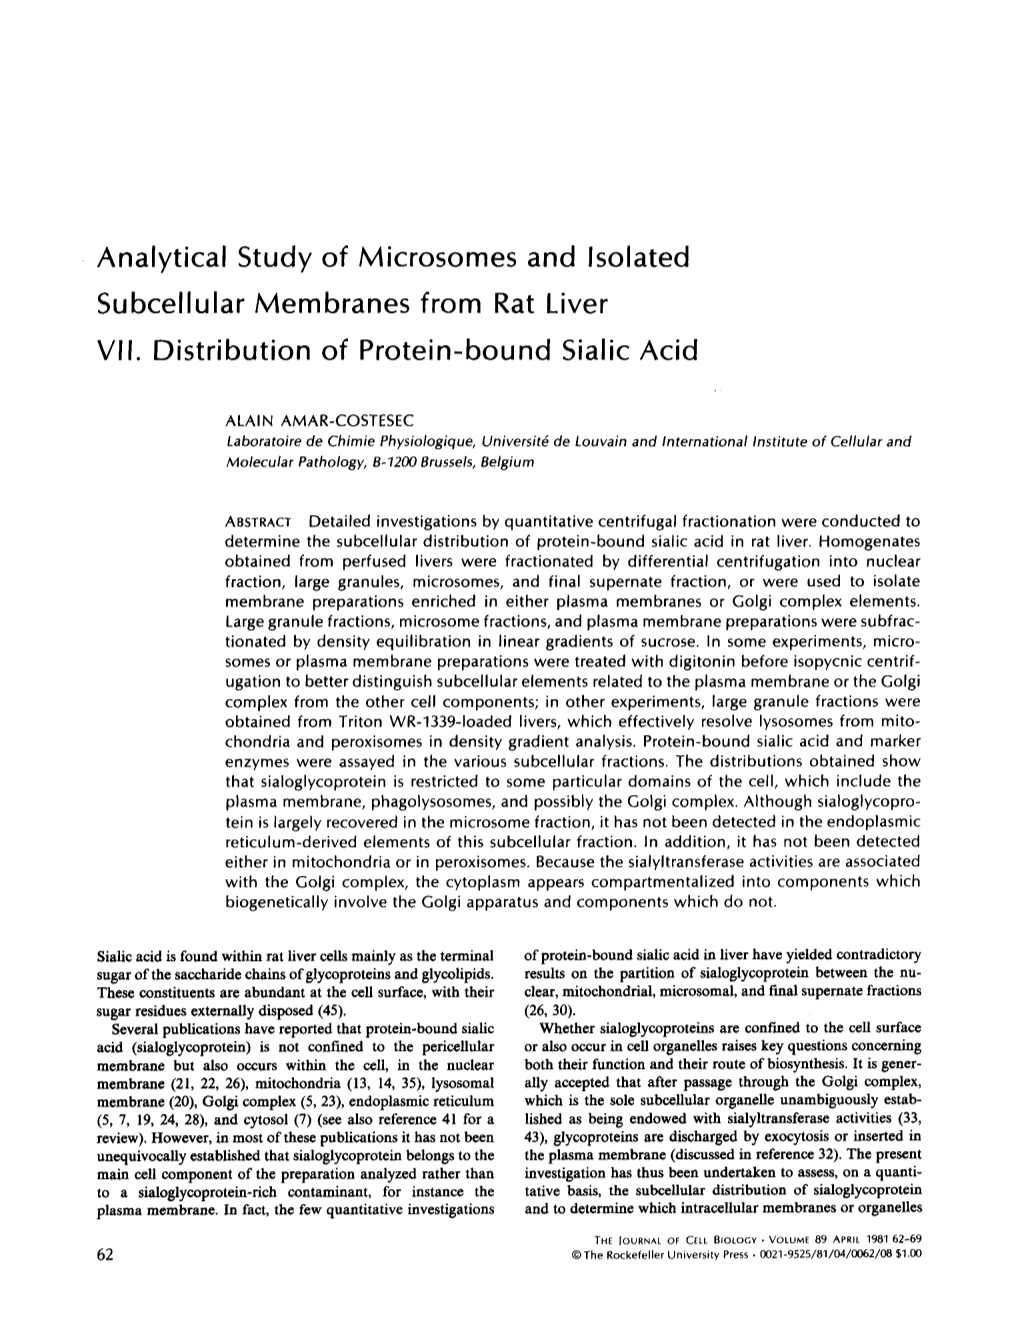 Analytical Study of Microsomes and Isolated Subcellular Membranes from Rat Liver VII